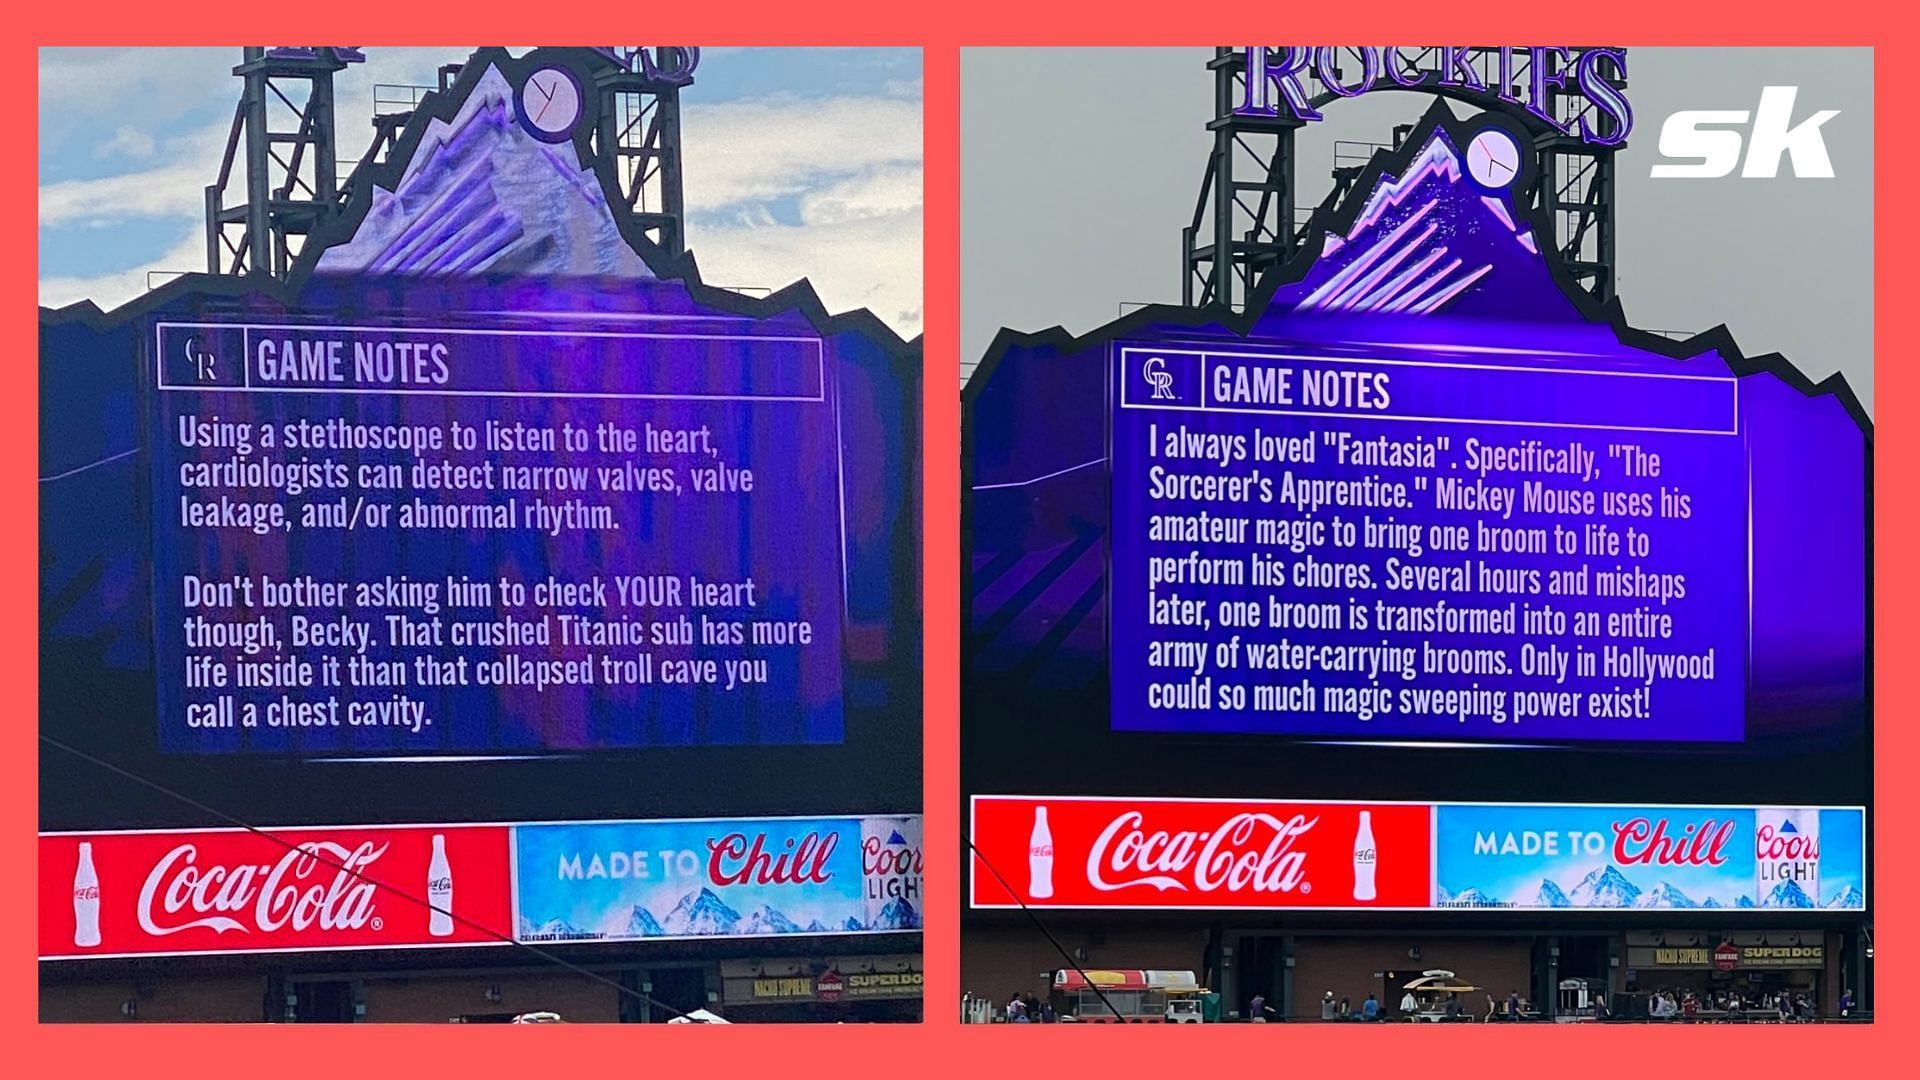 Colorado Rockies on X: “Today I got a message saying, 'Way to go